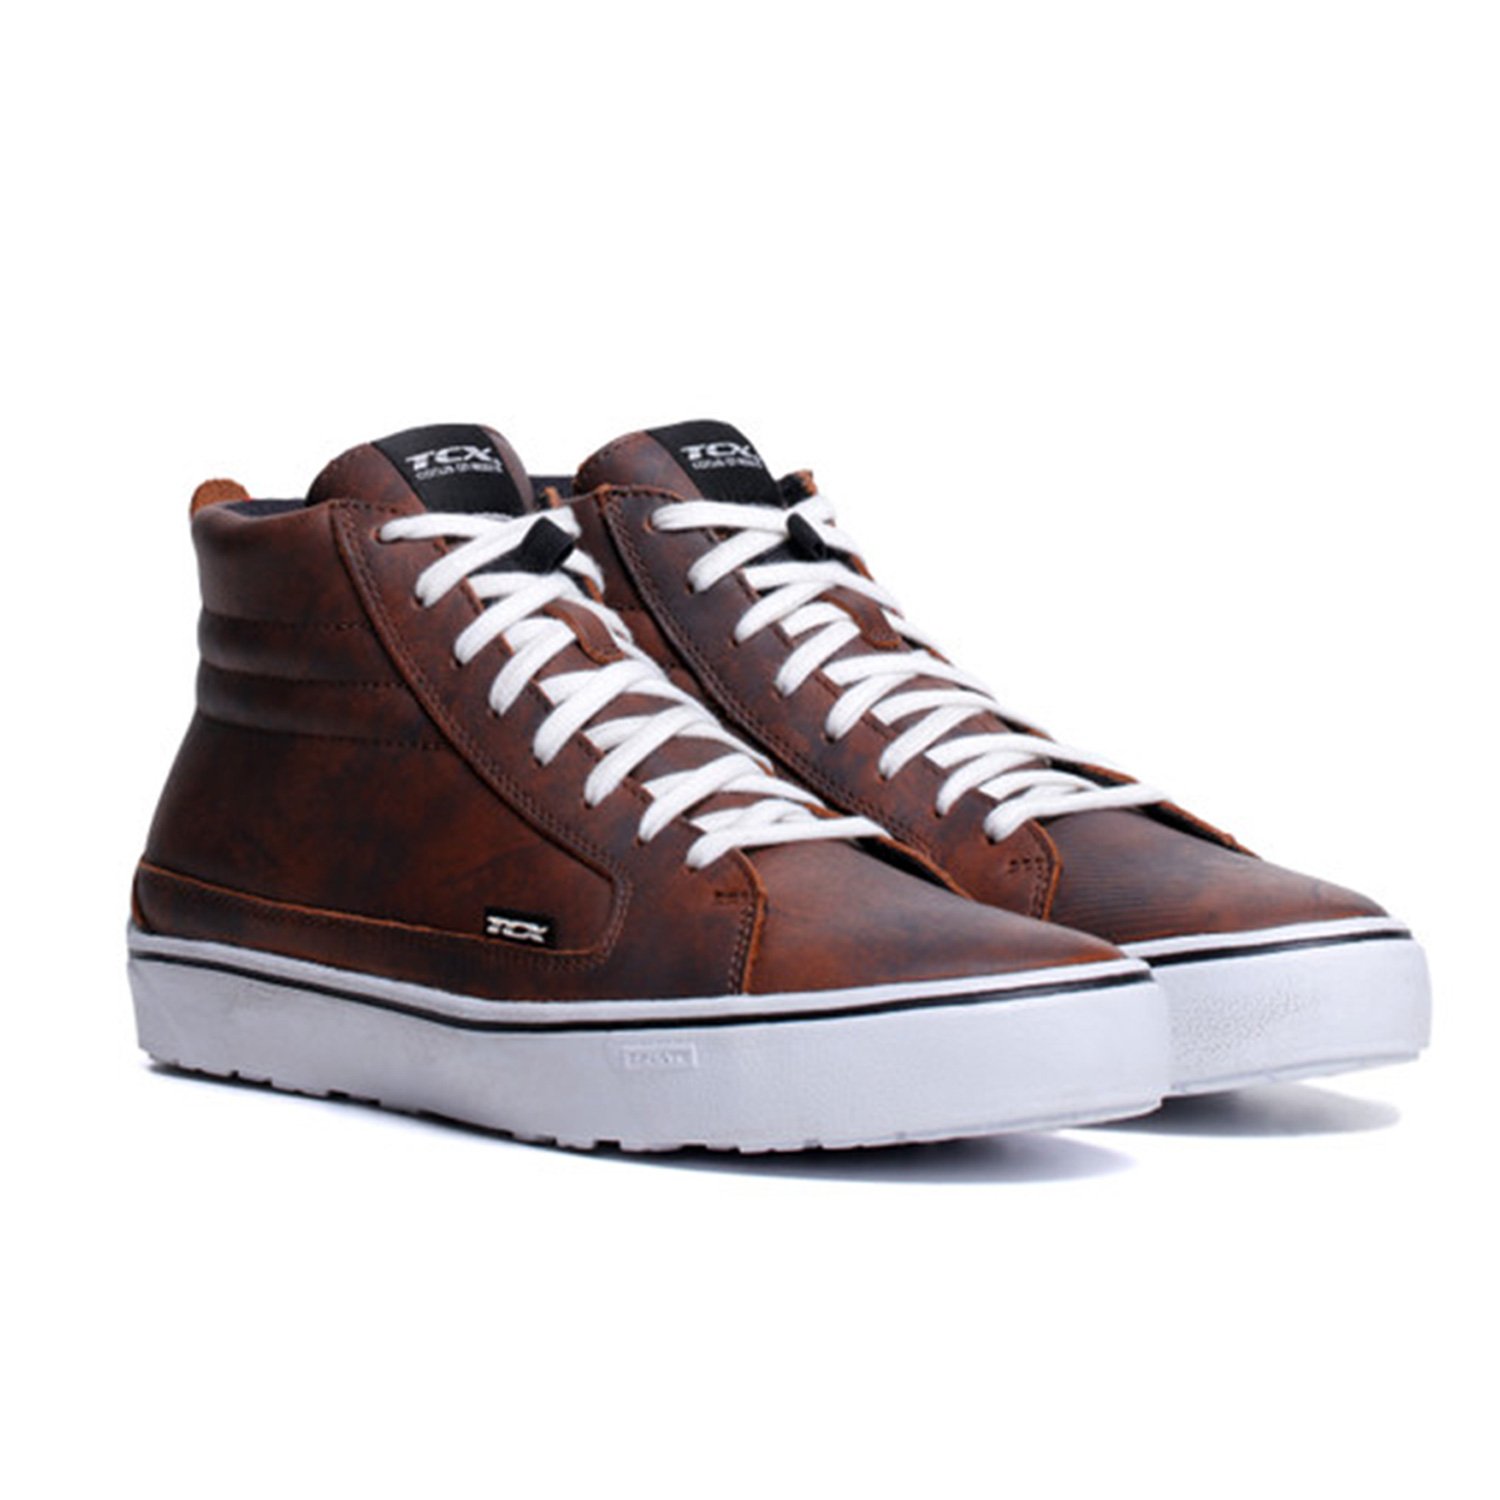 Image of TCX Street 3 WP Marron Blanc Chaussures Taille 38